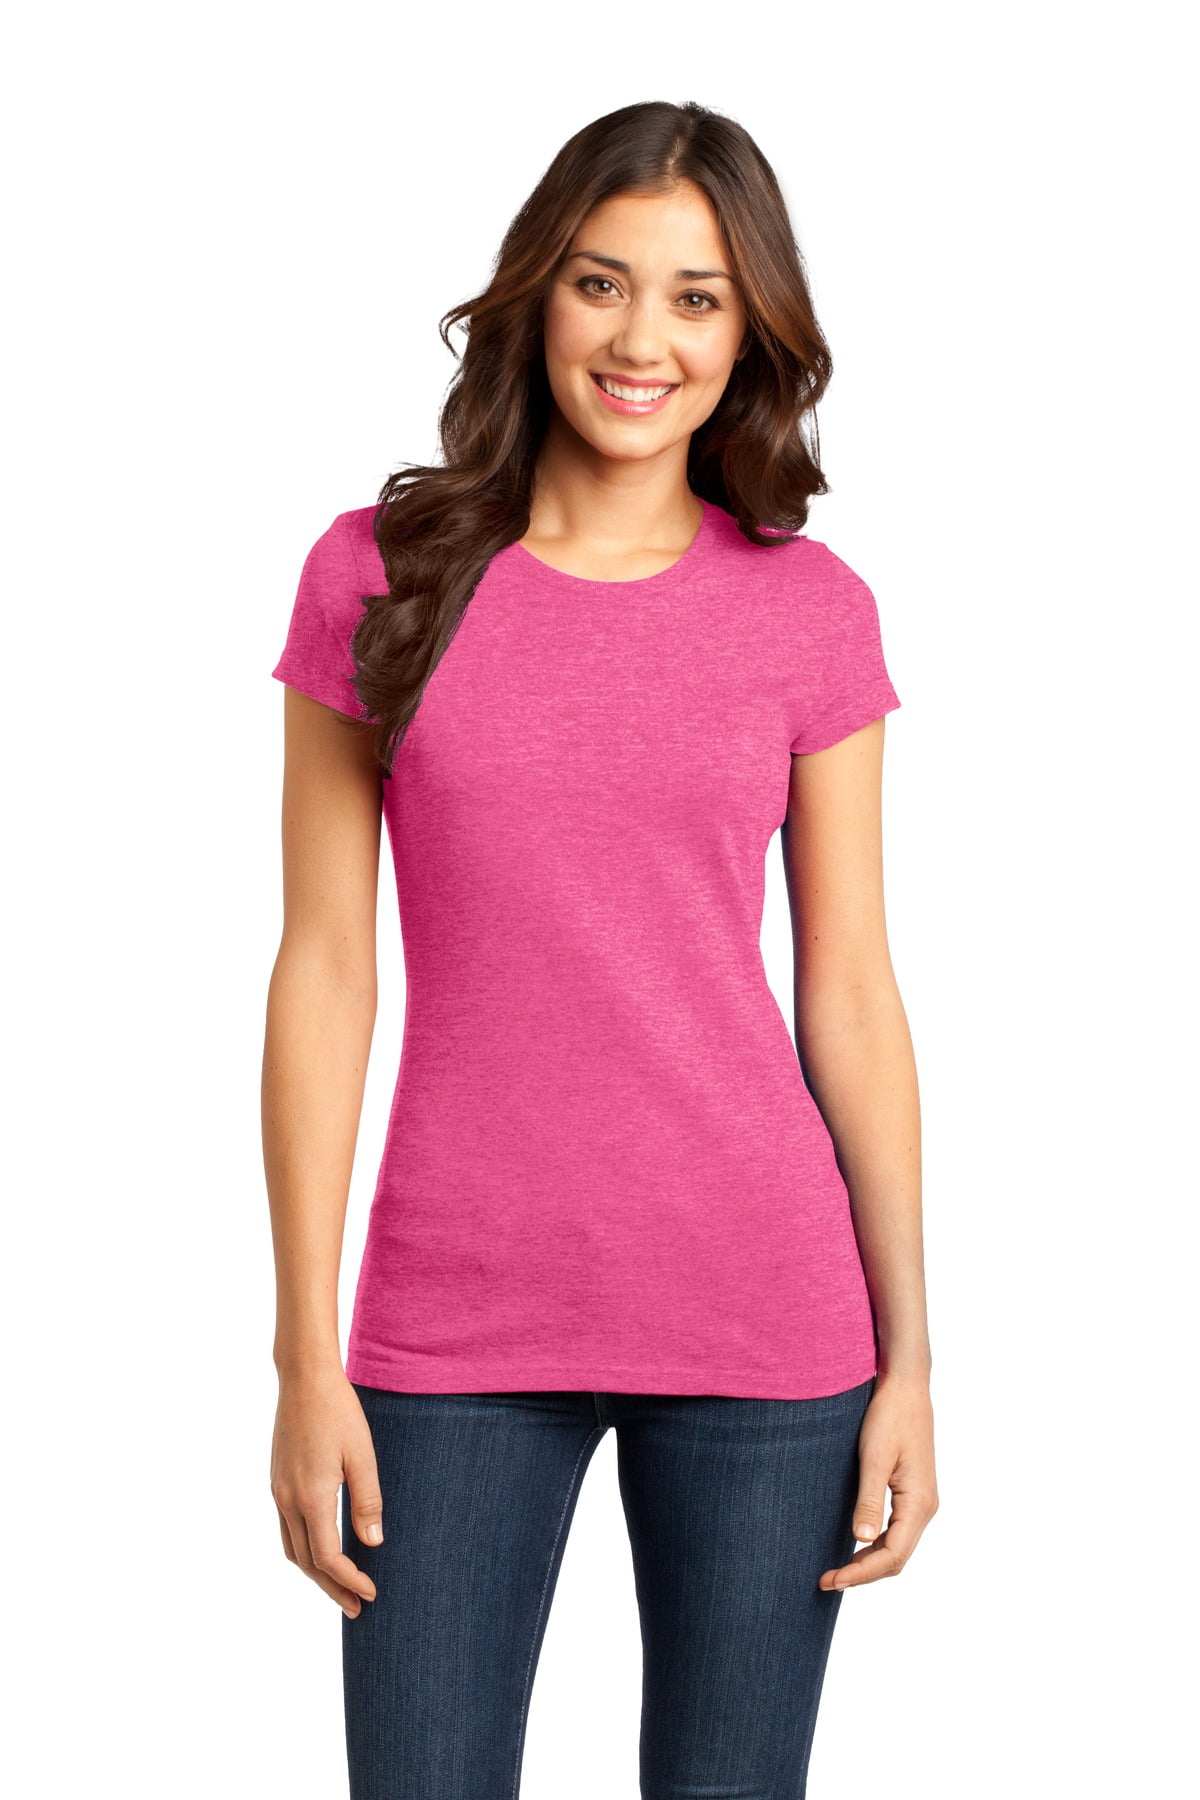 District DT6001 Juniors Very Important Tee , Fuchsia Frost, L